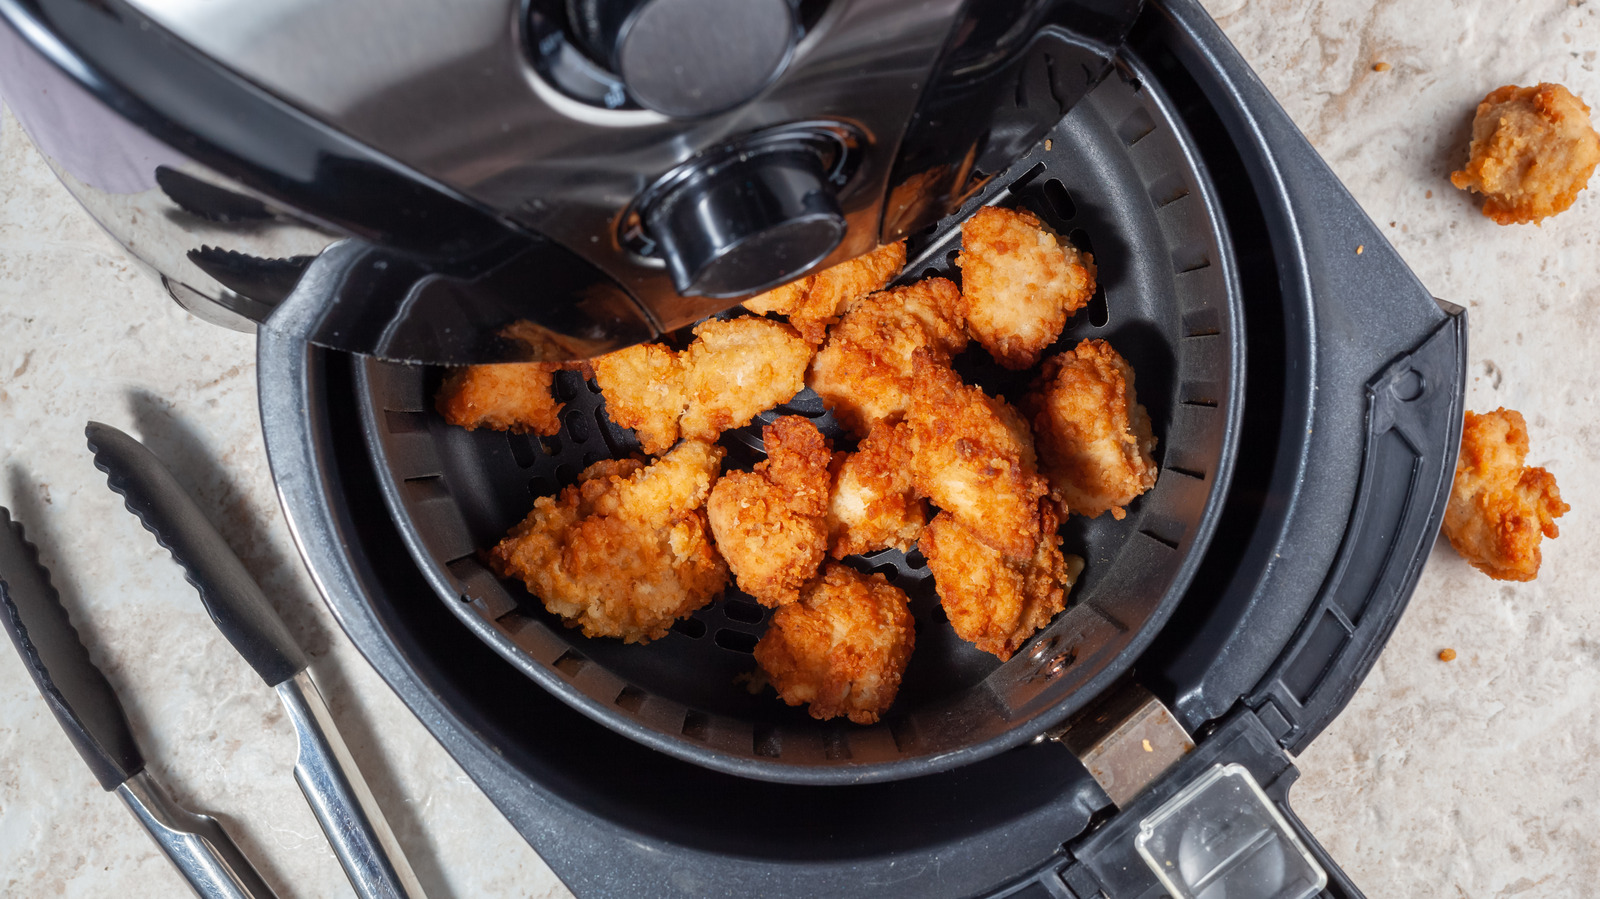 Should You Buy the Sur La Table Air Fryer From Costco